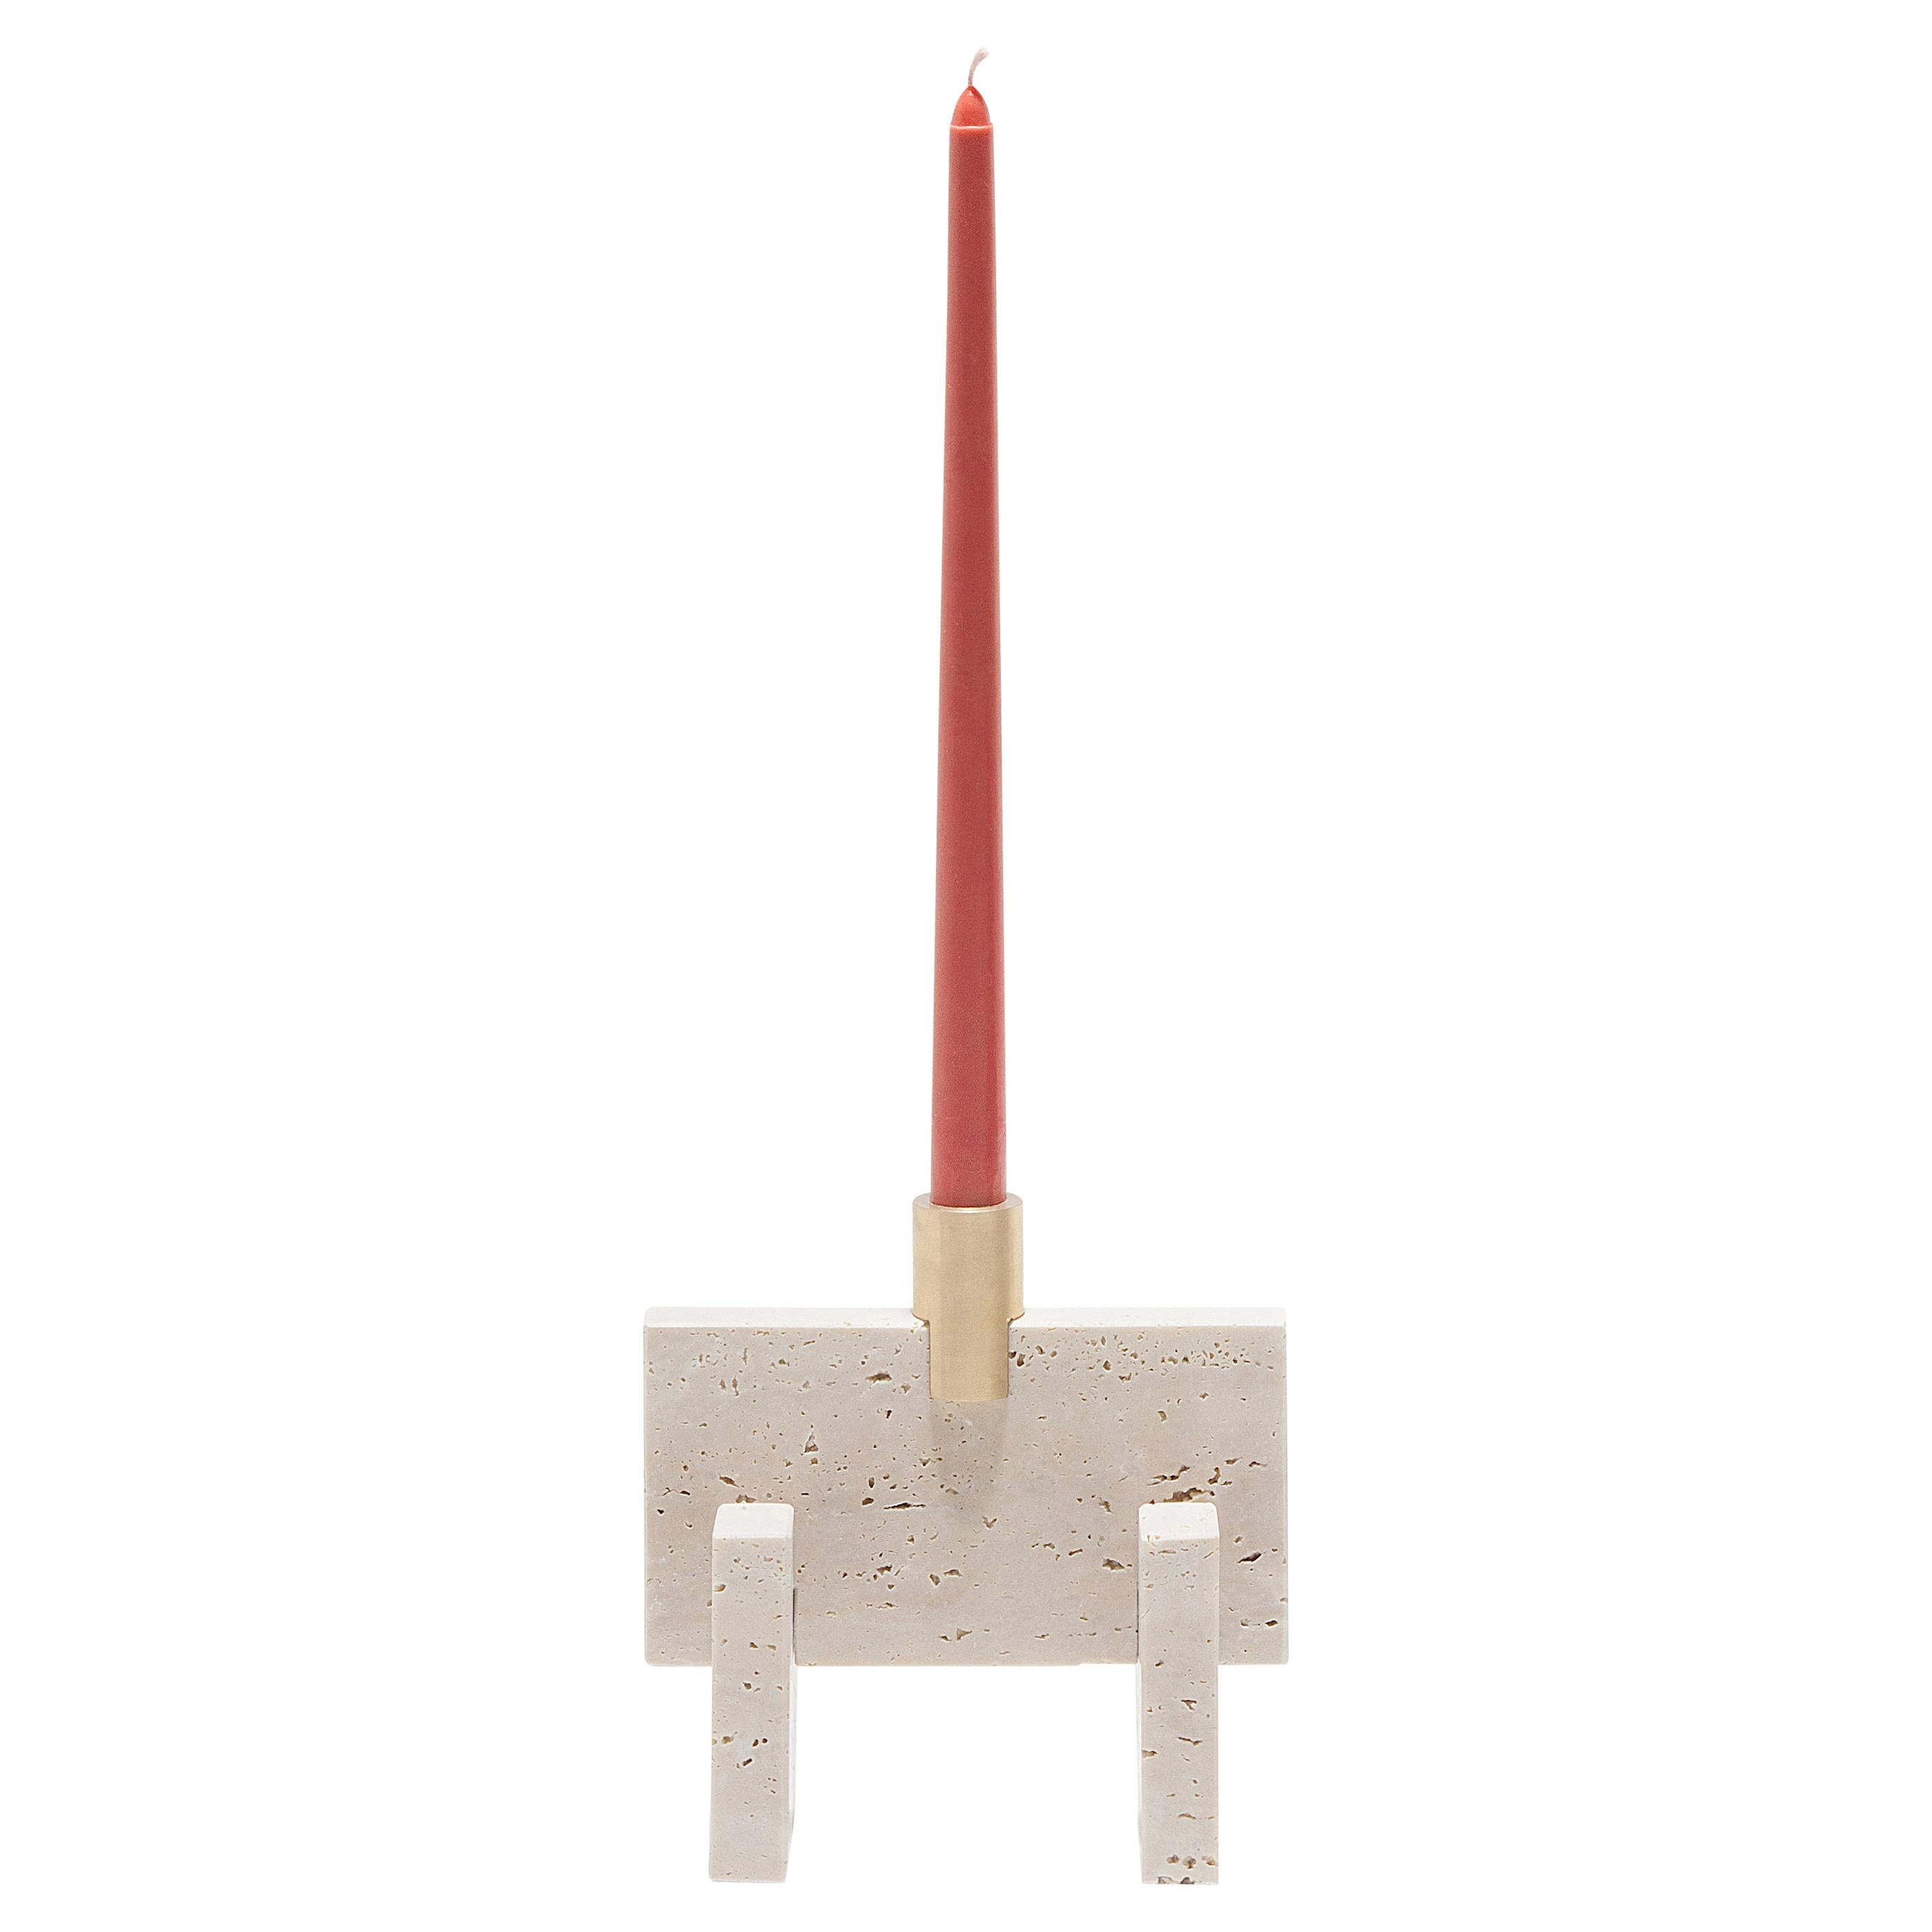 “Fit Candle One” Travertine Marble Minimalist Candle Holder by Aparentment